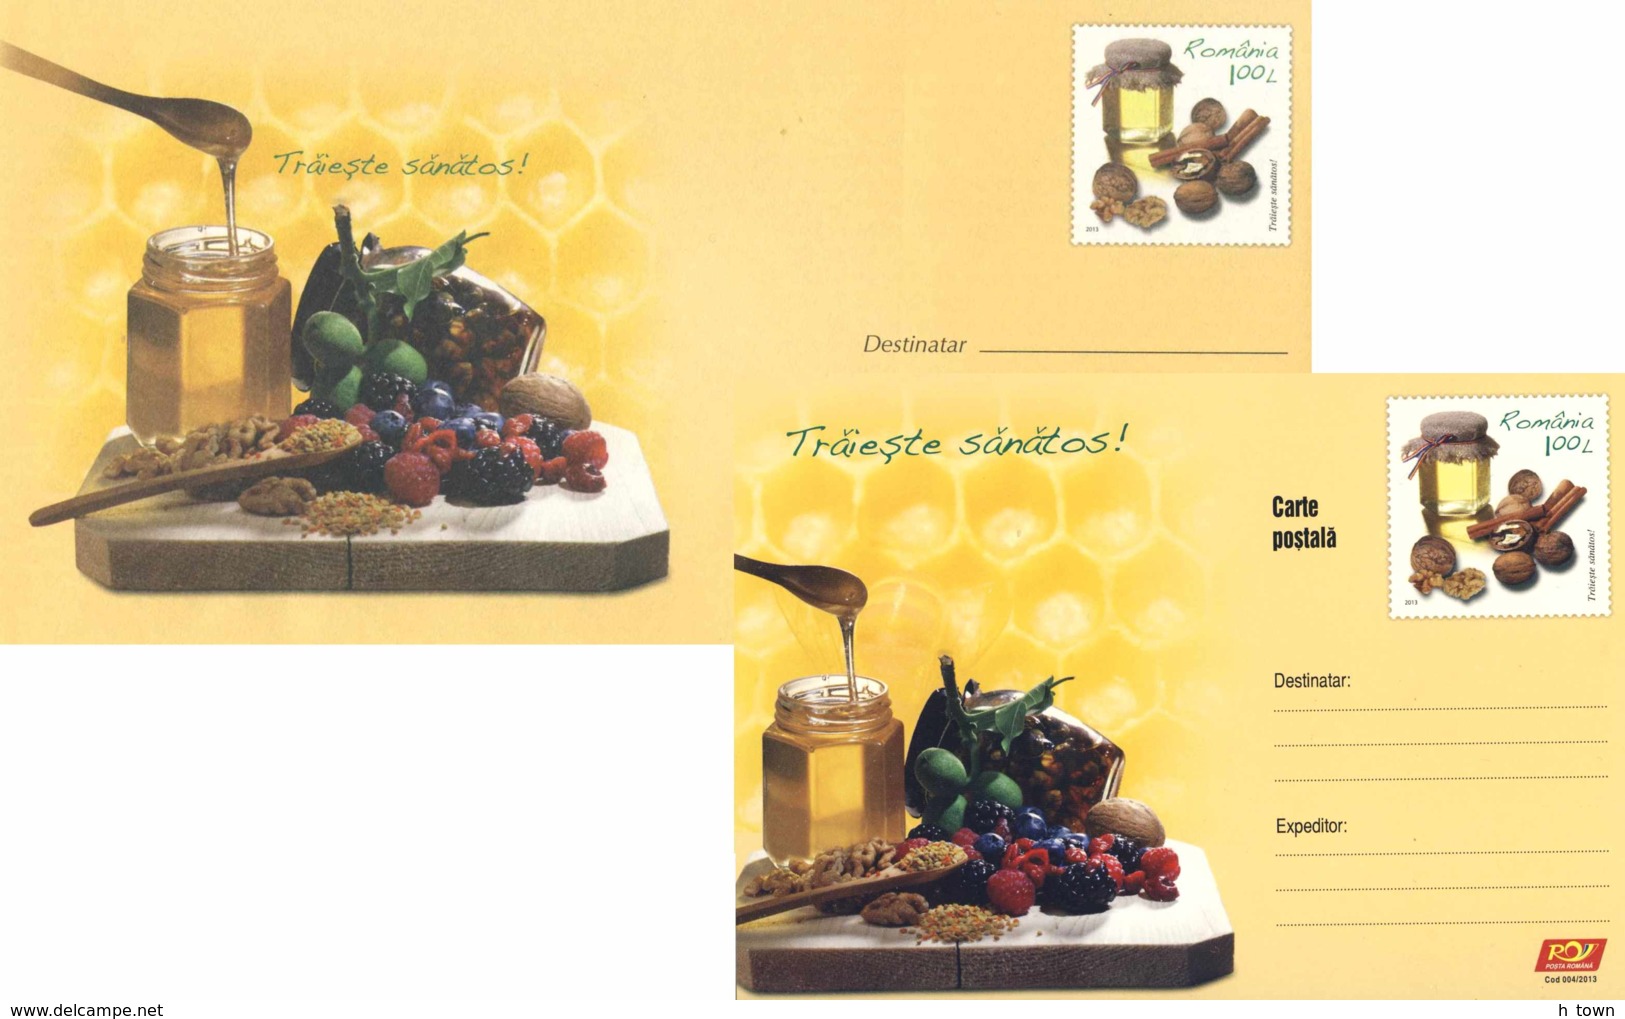 7189  Miel Gaufre, Noix: PAP+c.p. 2013 - Honey, Nuts: Stationery Cover+Postcard. Honeycomb Beekeeping Apiculture Abeille - Abejas